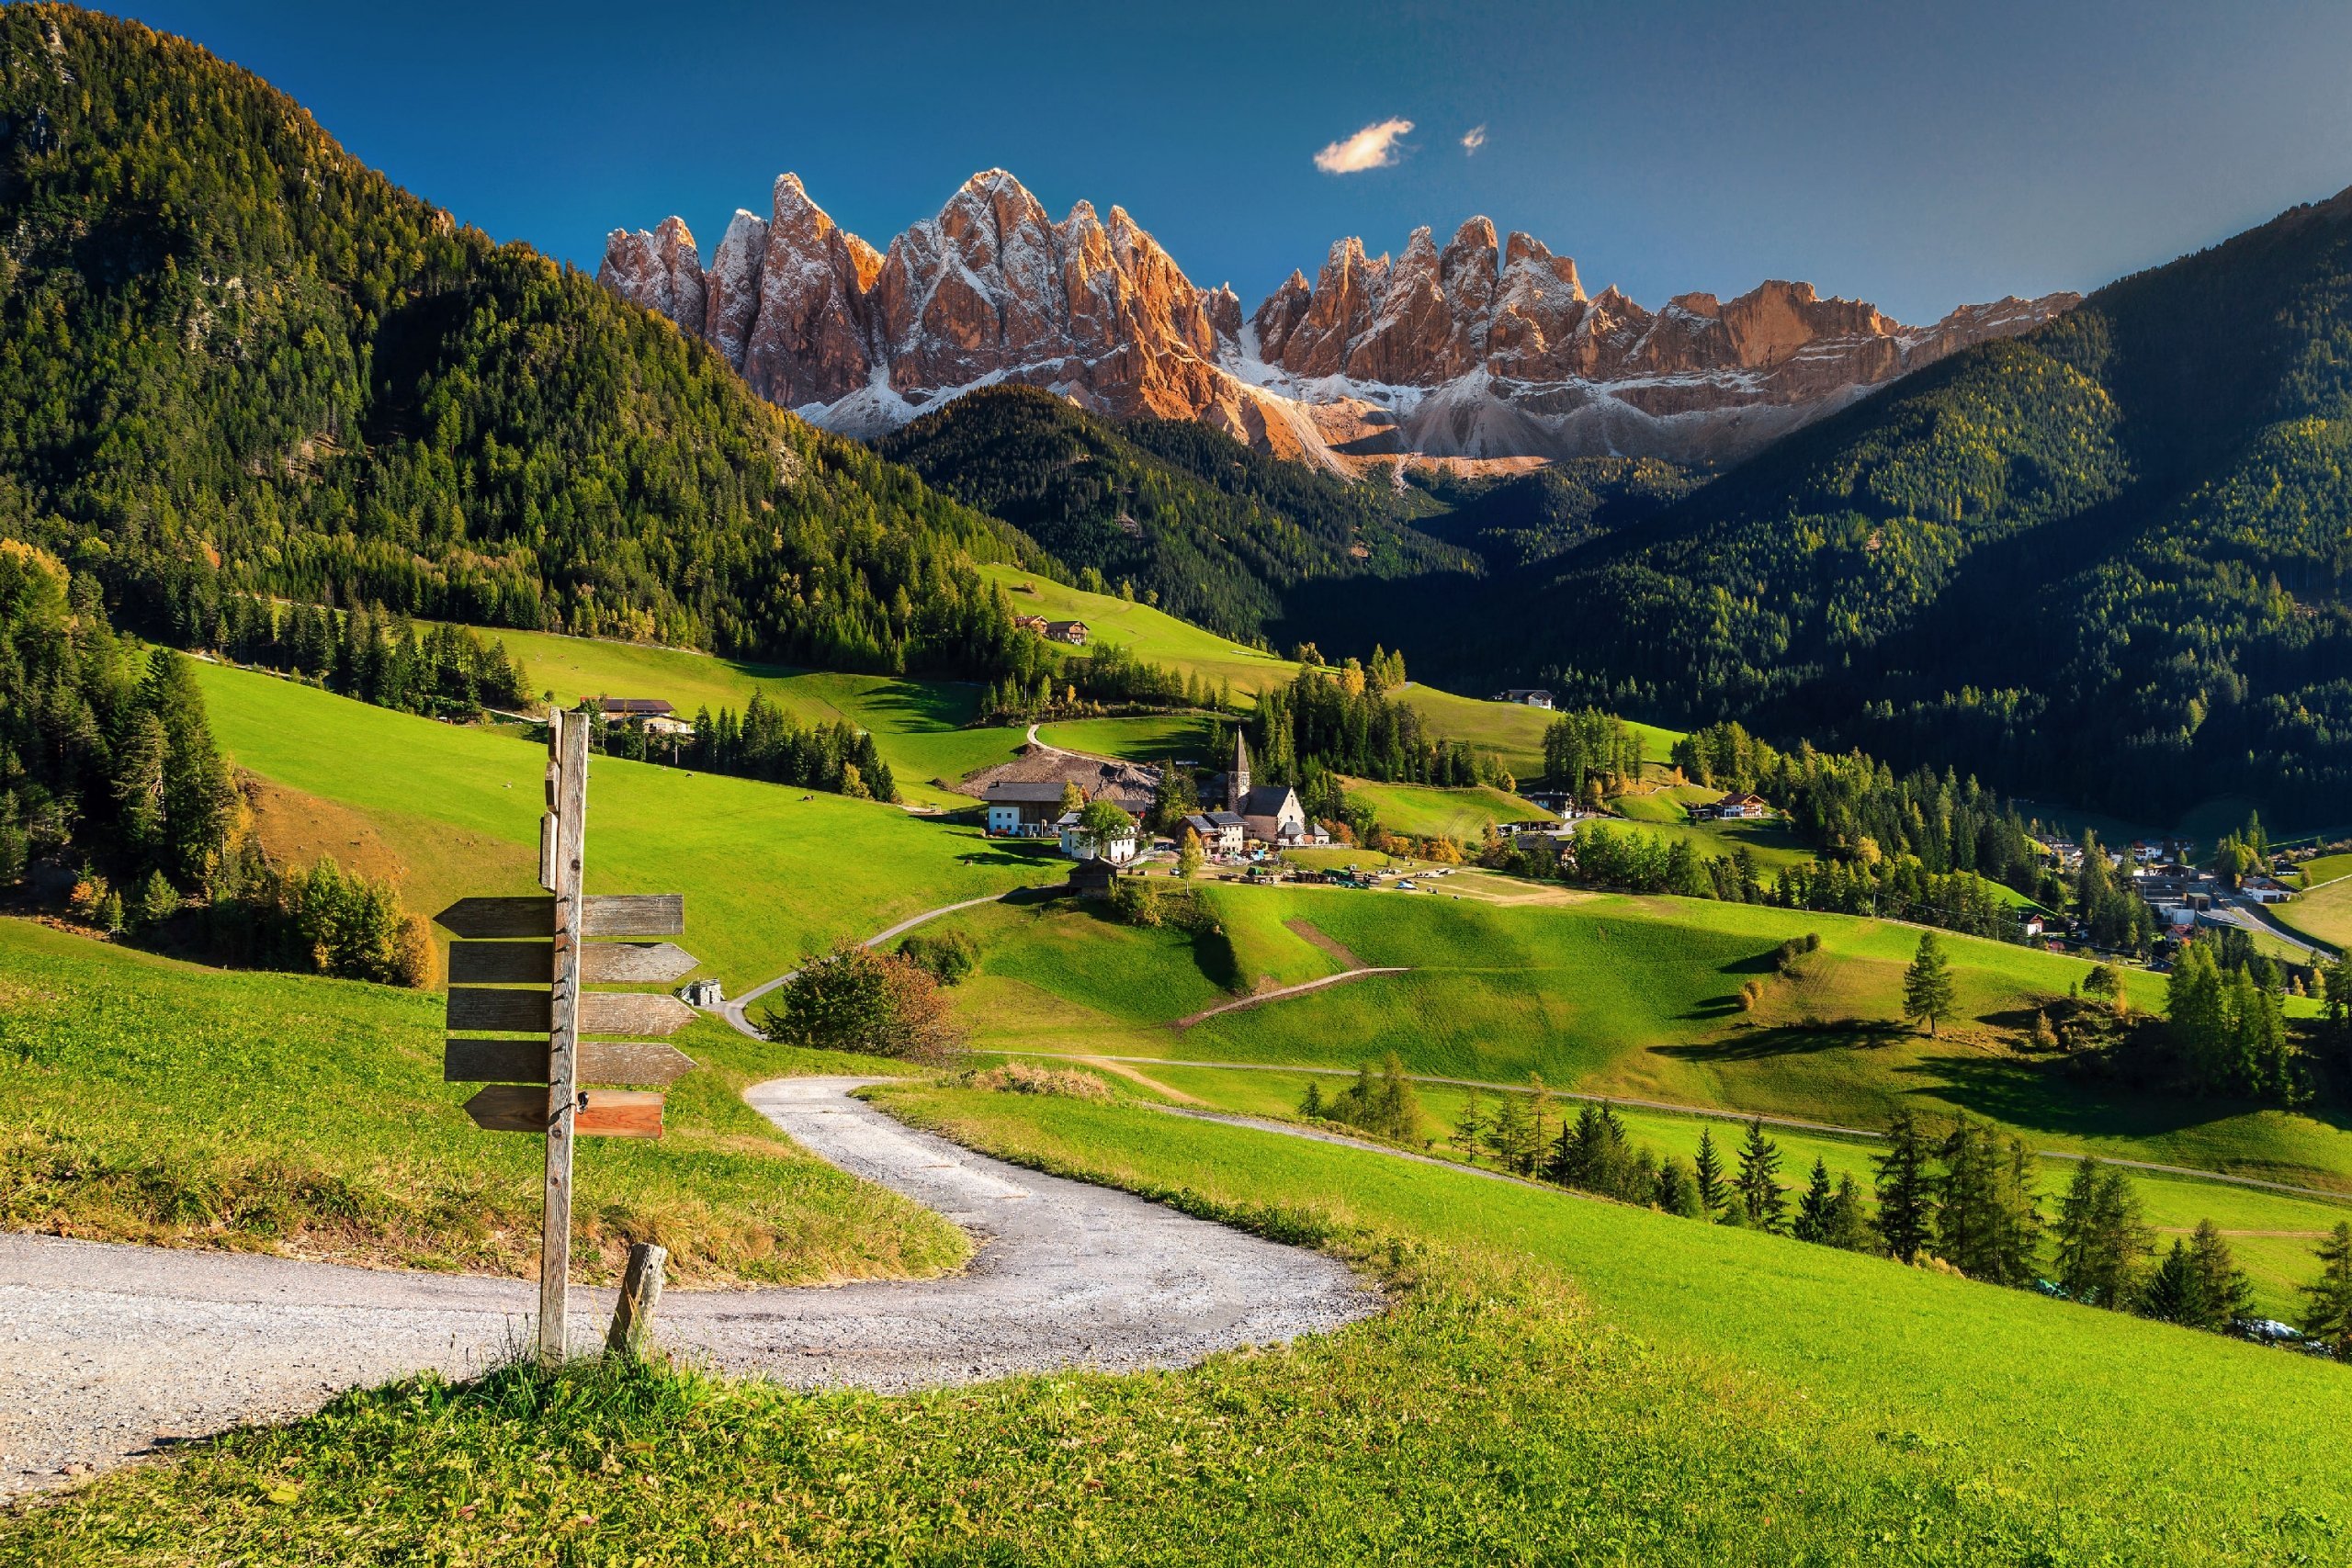 Italy: Valleys of the Dolomites
